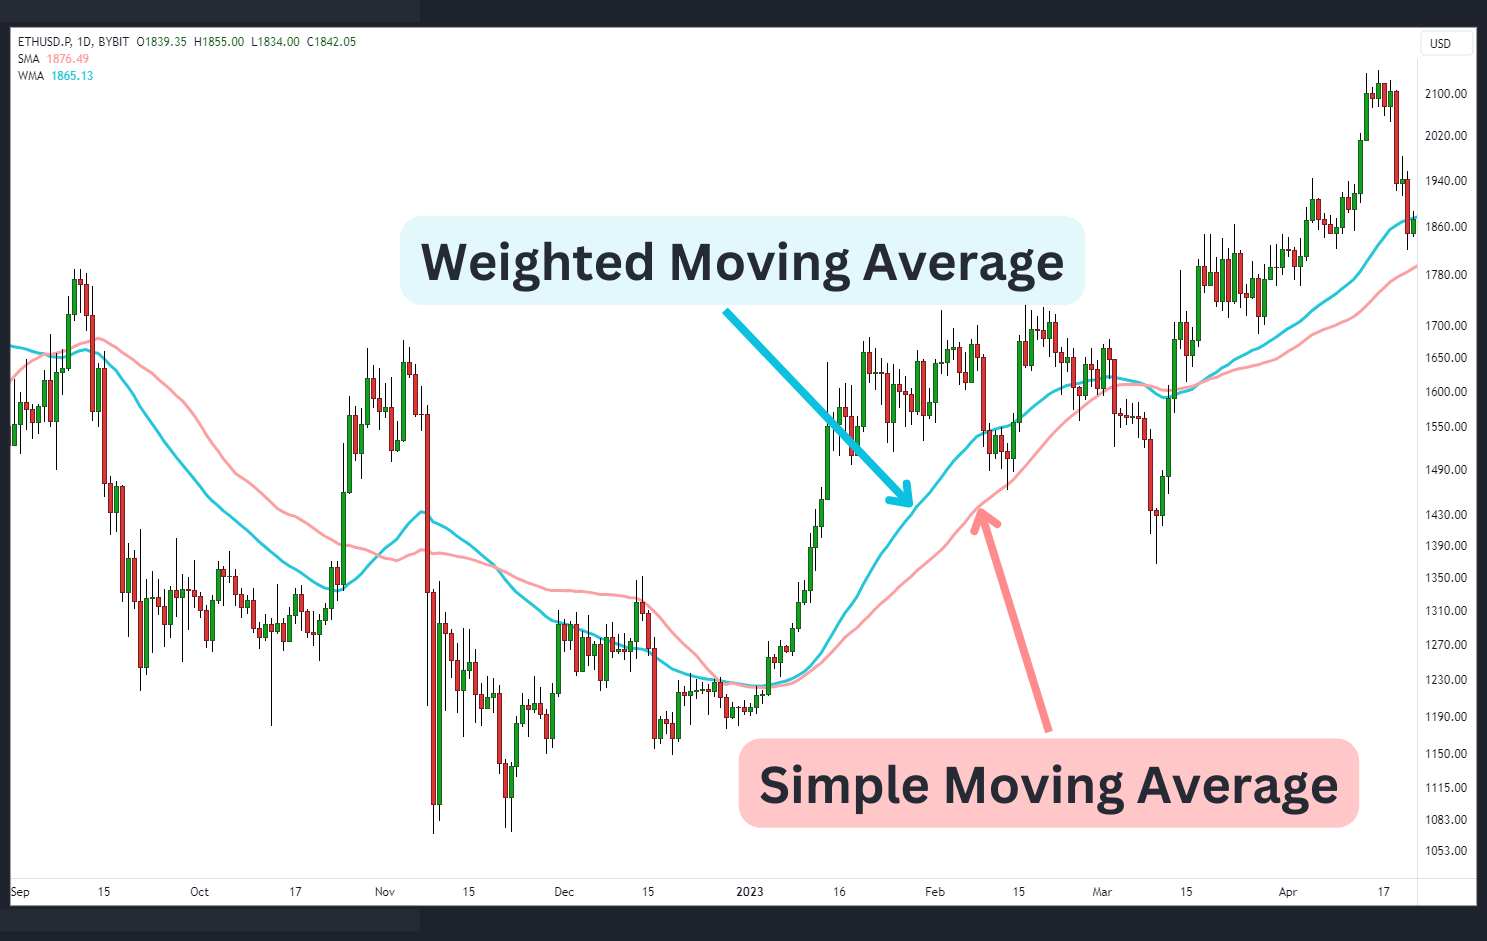 A comparison of weighted moving average and simple moving average